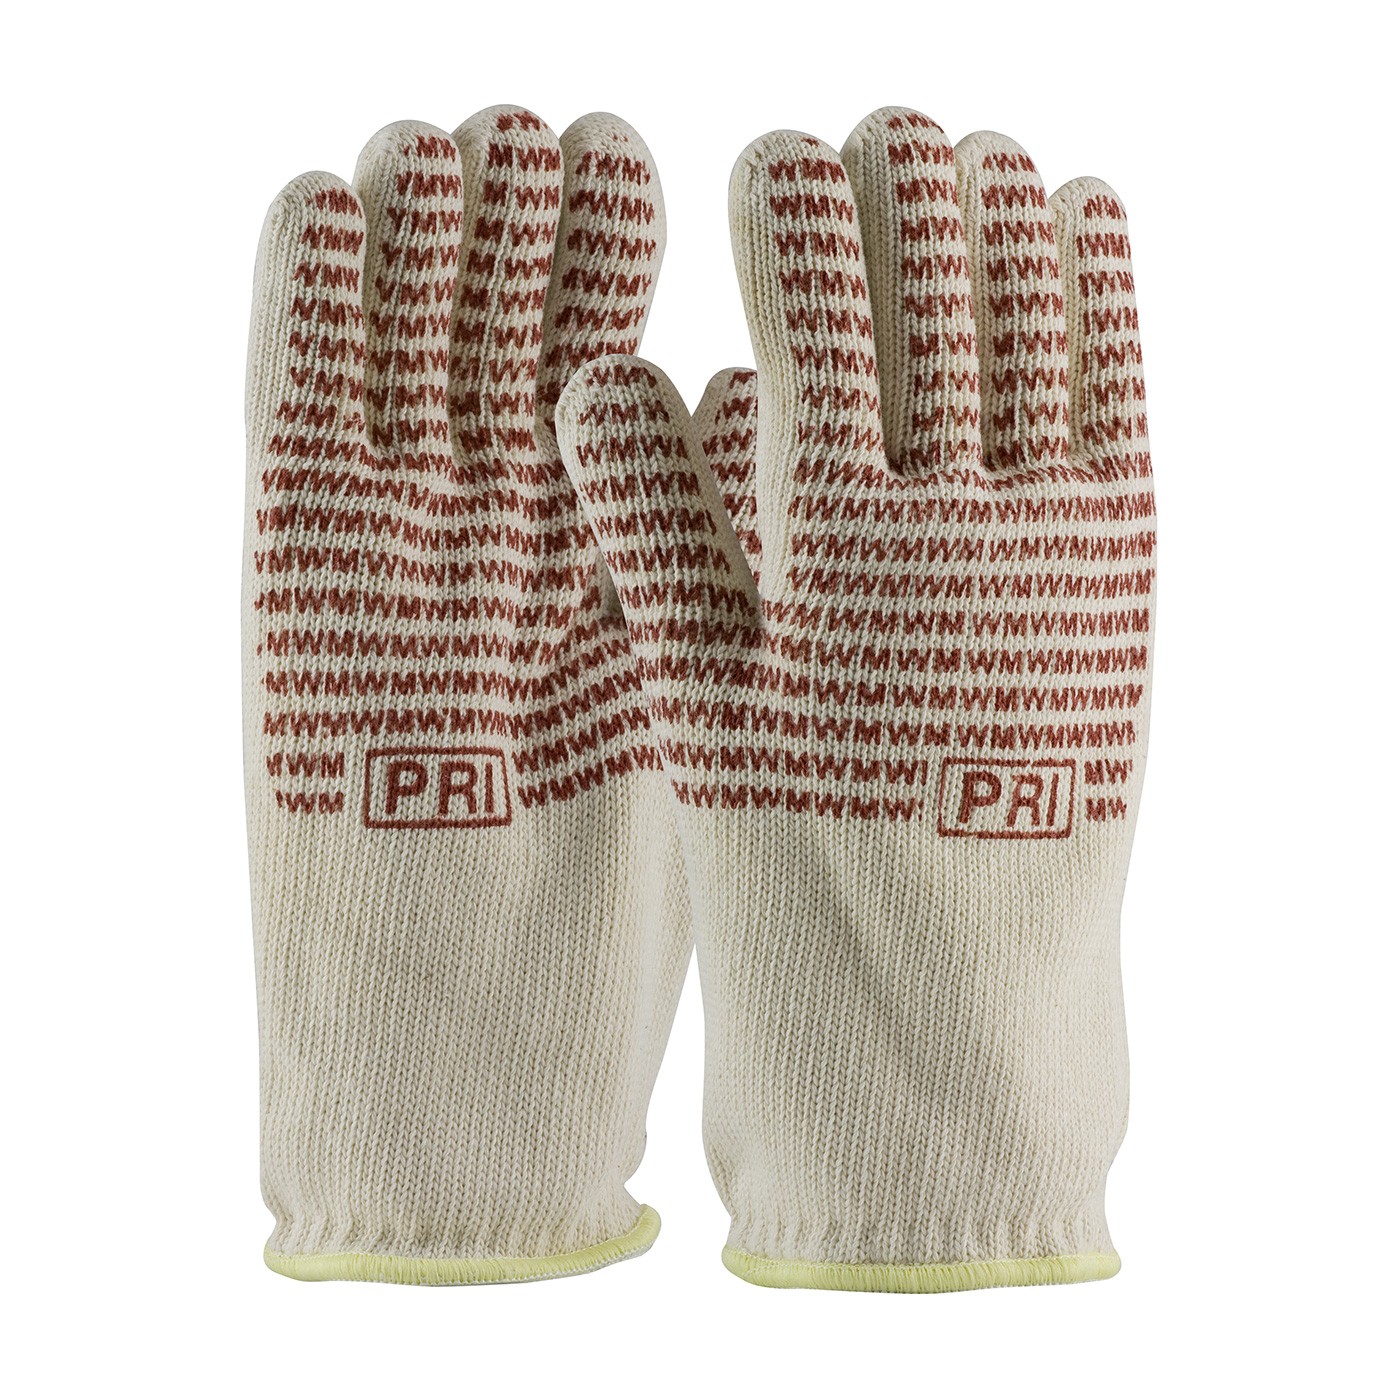 PIP® Double-Layered Cotton Seamless Knit Hot Mill Glove with Double-Sided EverGrip™ Nitrile Coating - 32 oz  (#43-802)